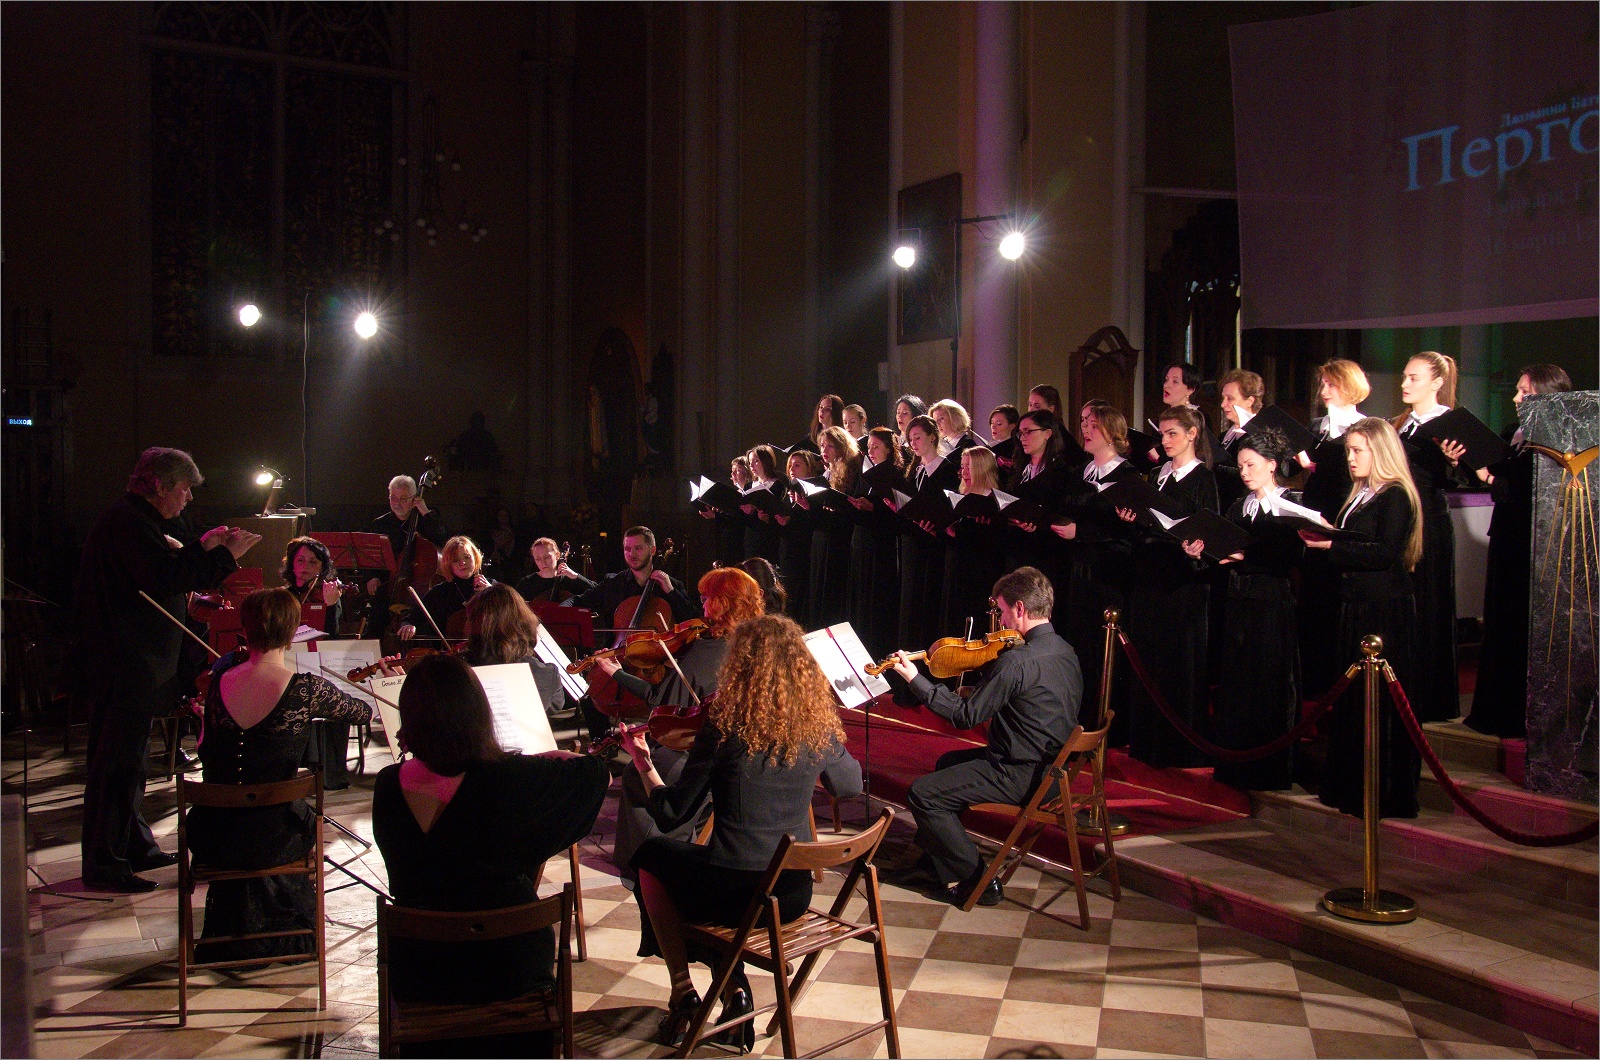 Videos of recitals by Instrumental Capella and MRP’s Choir at Roman Catholic Cathedral